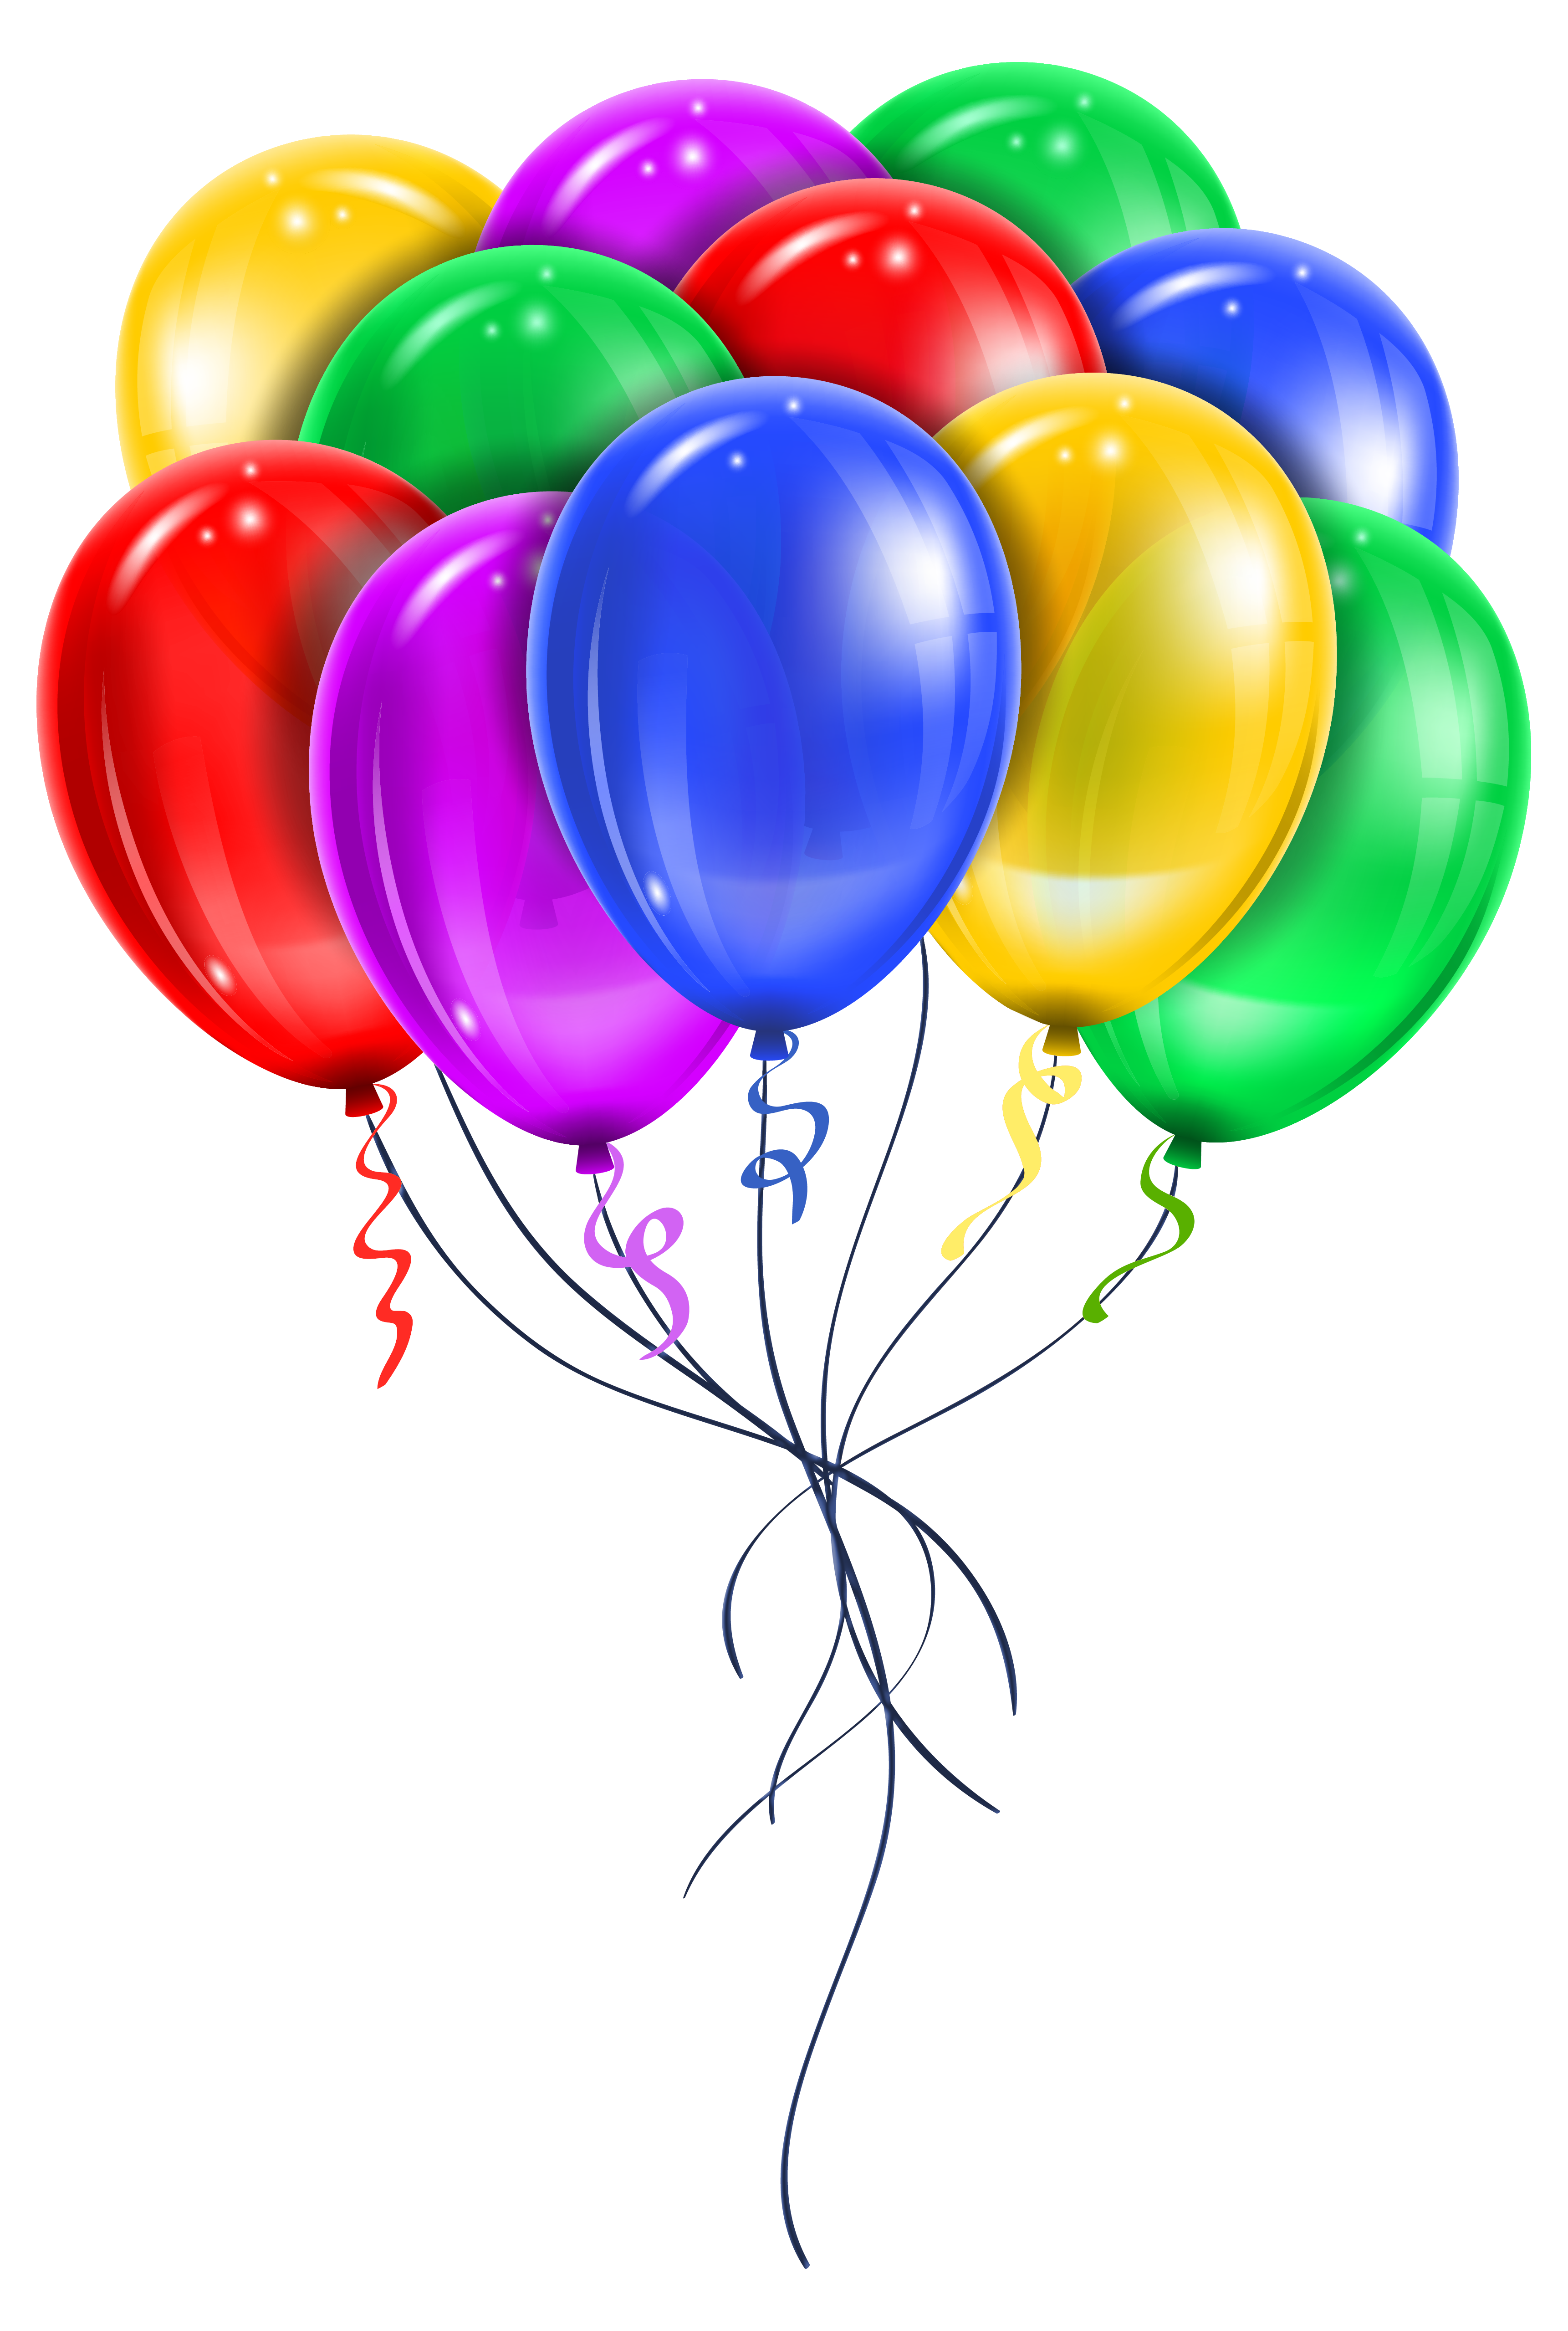 Free Balloon Png Transparent, Download Free Clip Art, Free